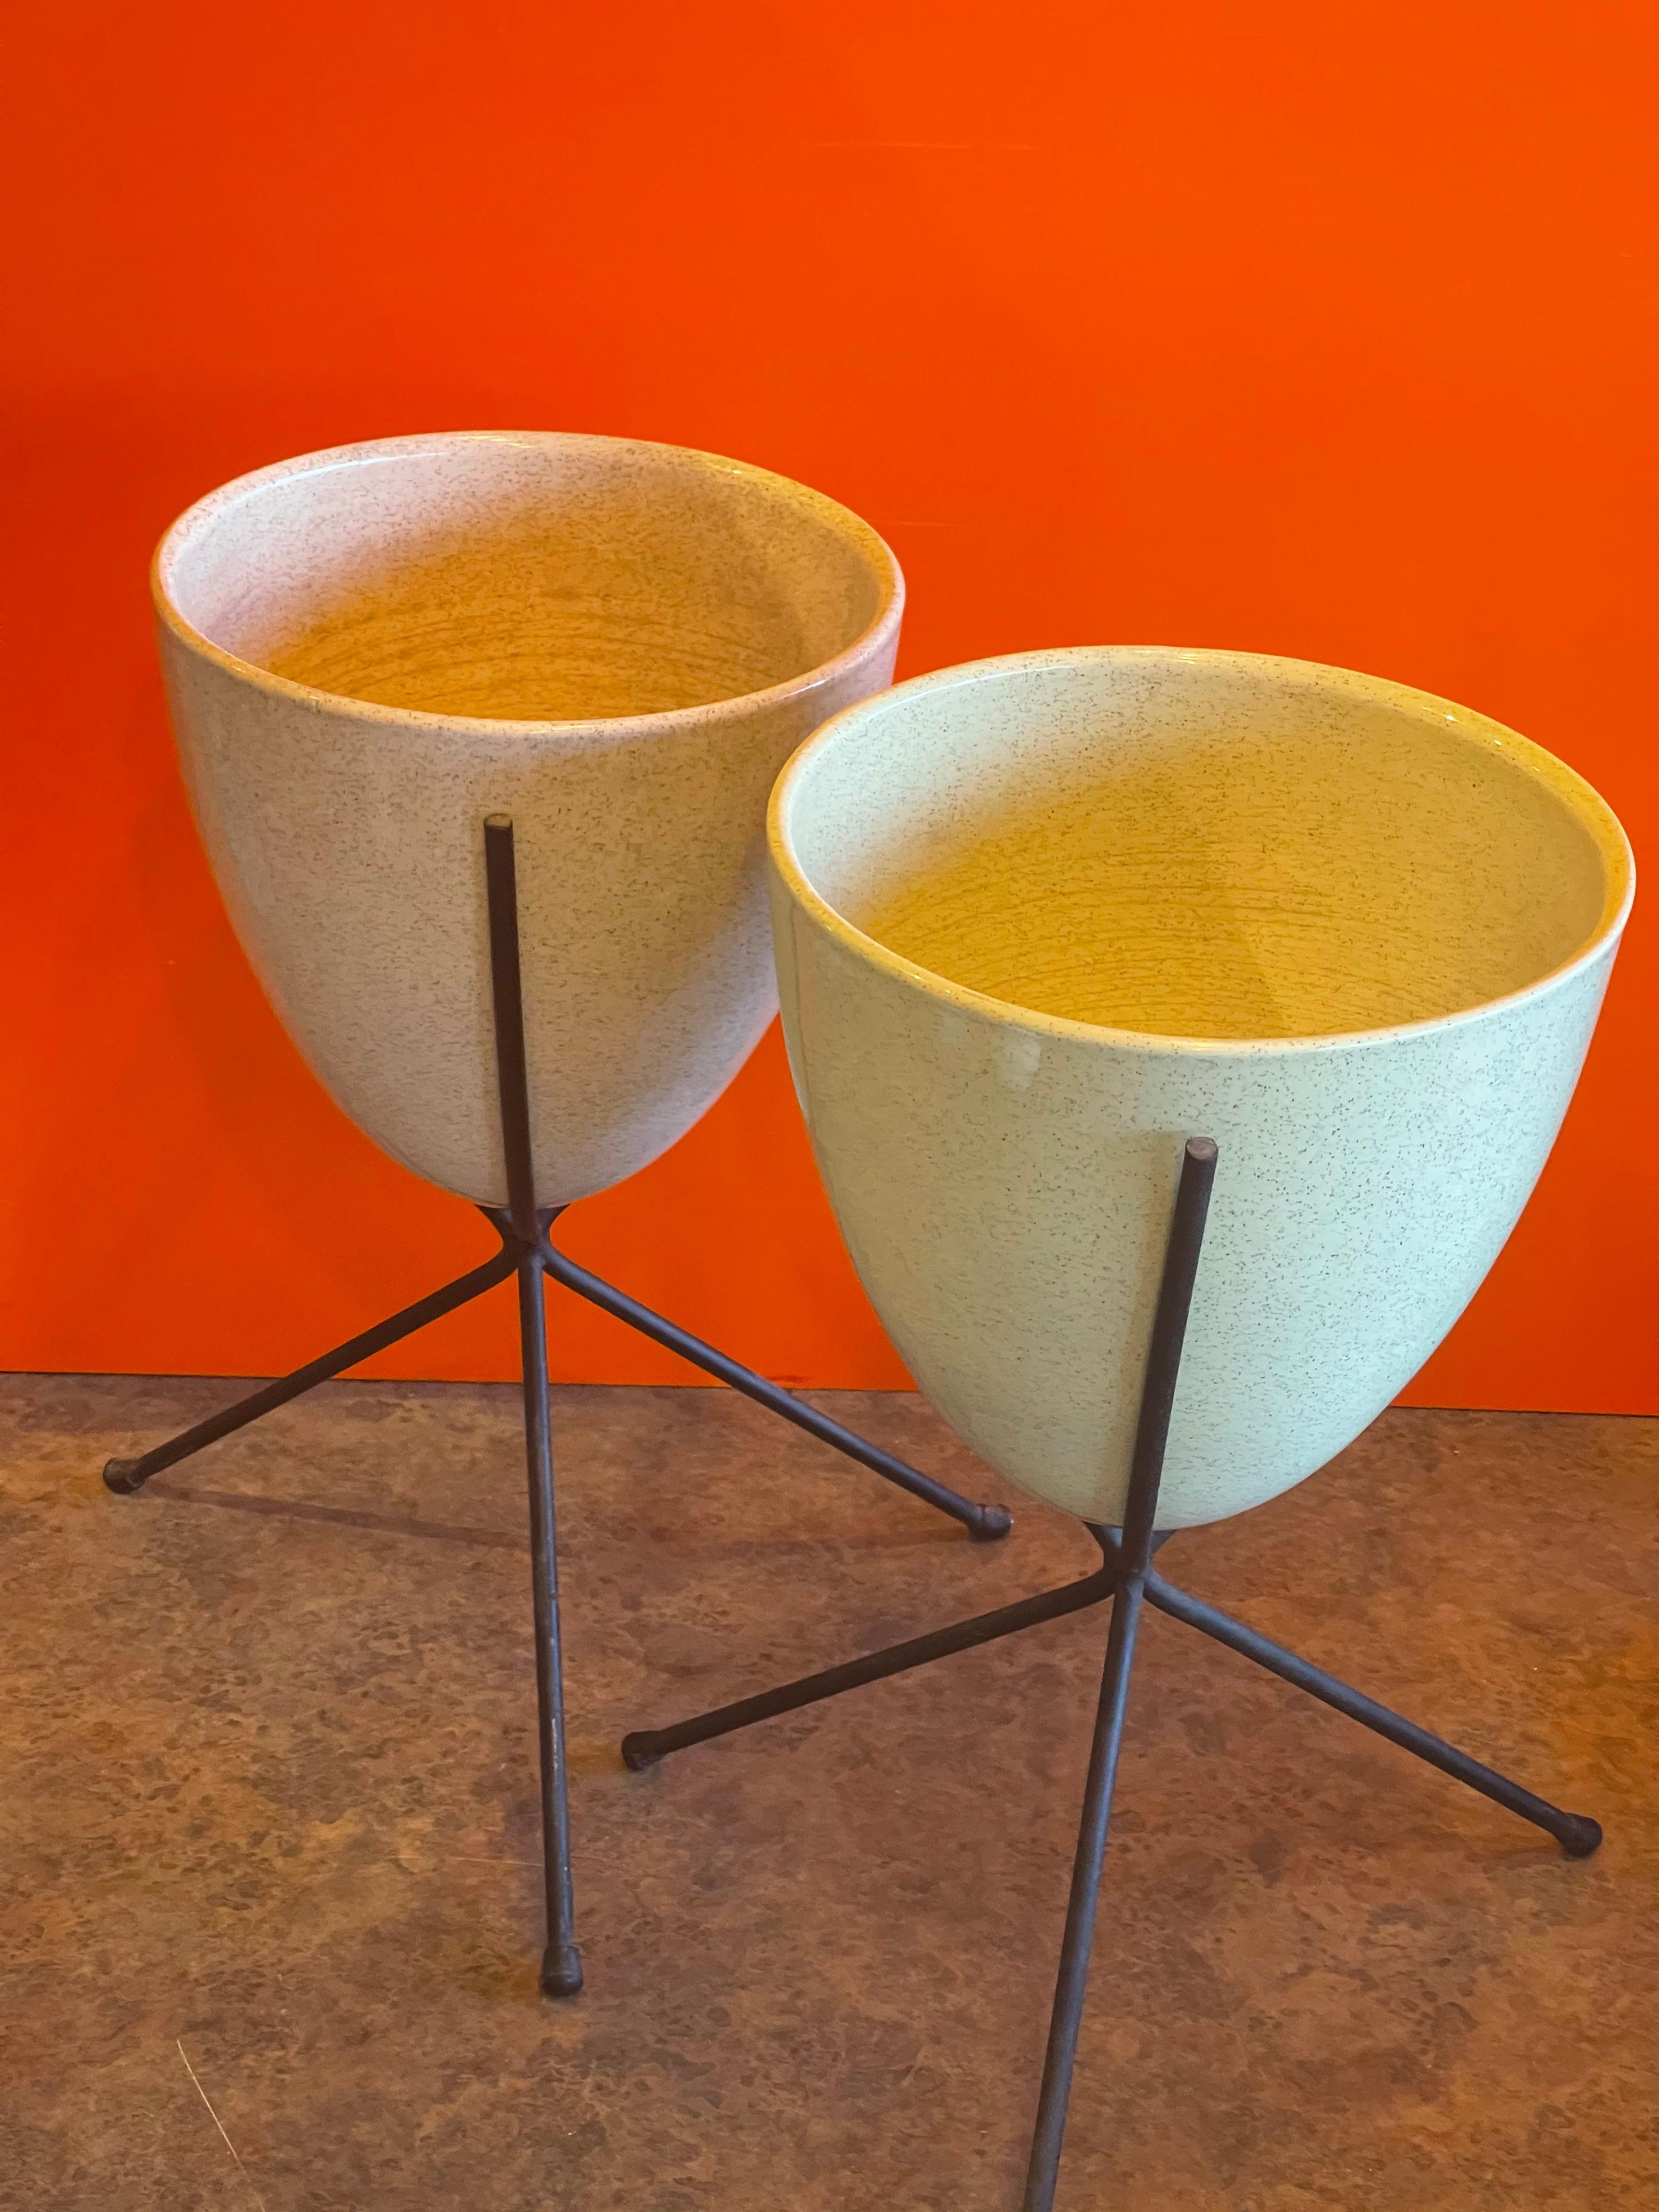 Rare Pair of Atomic Age Ceramic Bullet Planters on the Metal Stands by Bauer In Good Condition For Sale In San Diego, CA